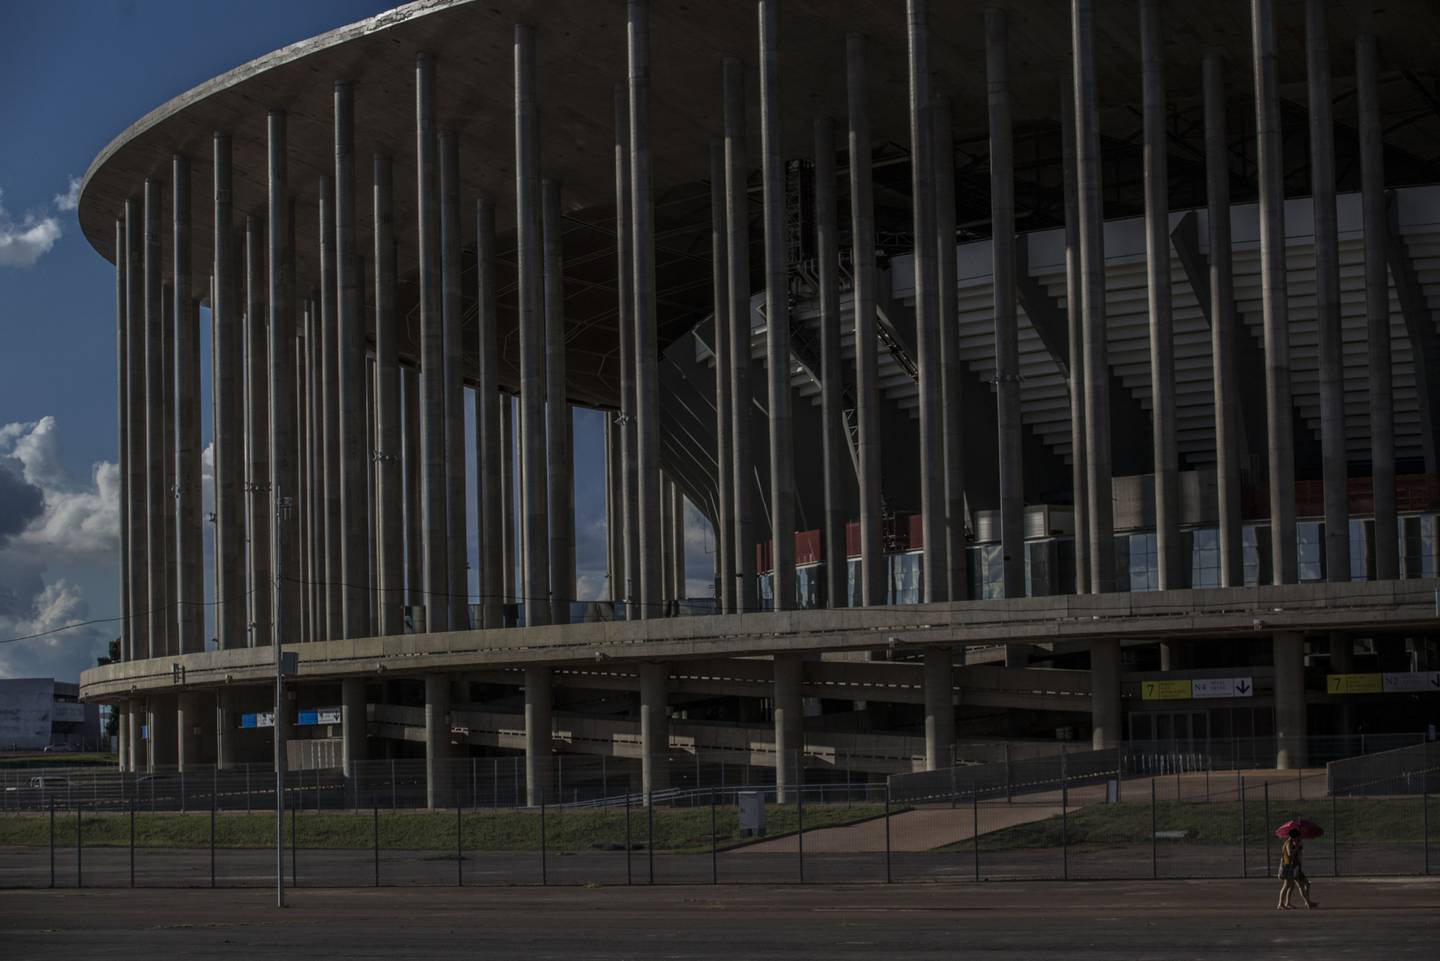 The Mane Garrincha National Stadium in Brazil was renovated for $900 million ahead of the 2014 World Cup.  Photographer: Dado Galdieri/Bloombergdfd